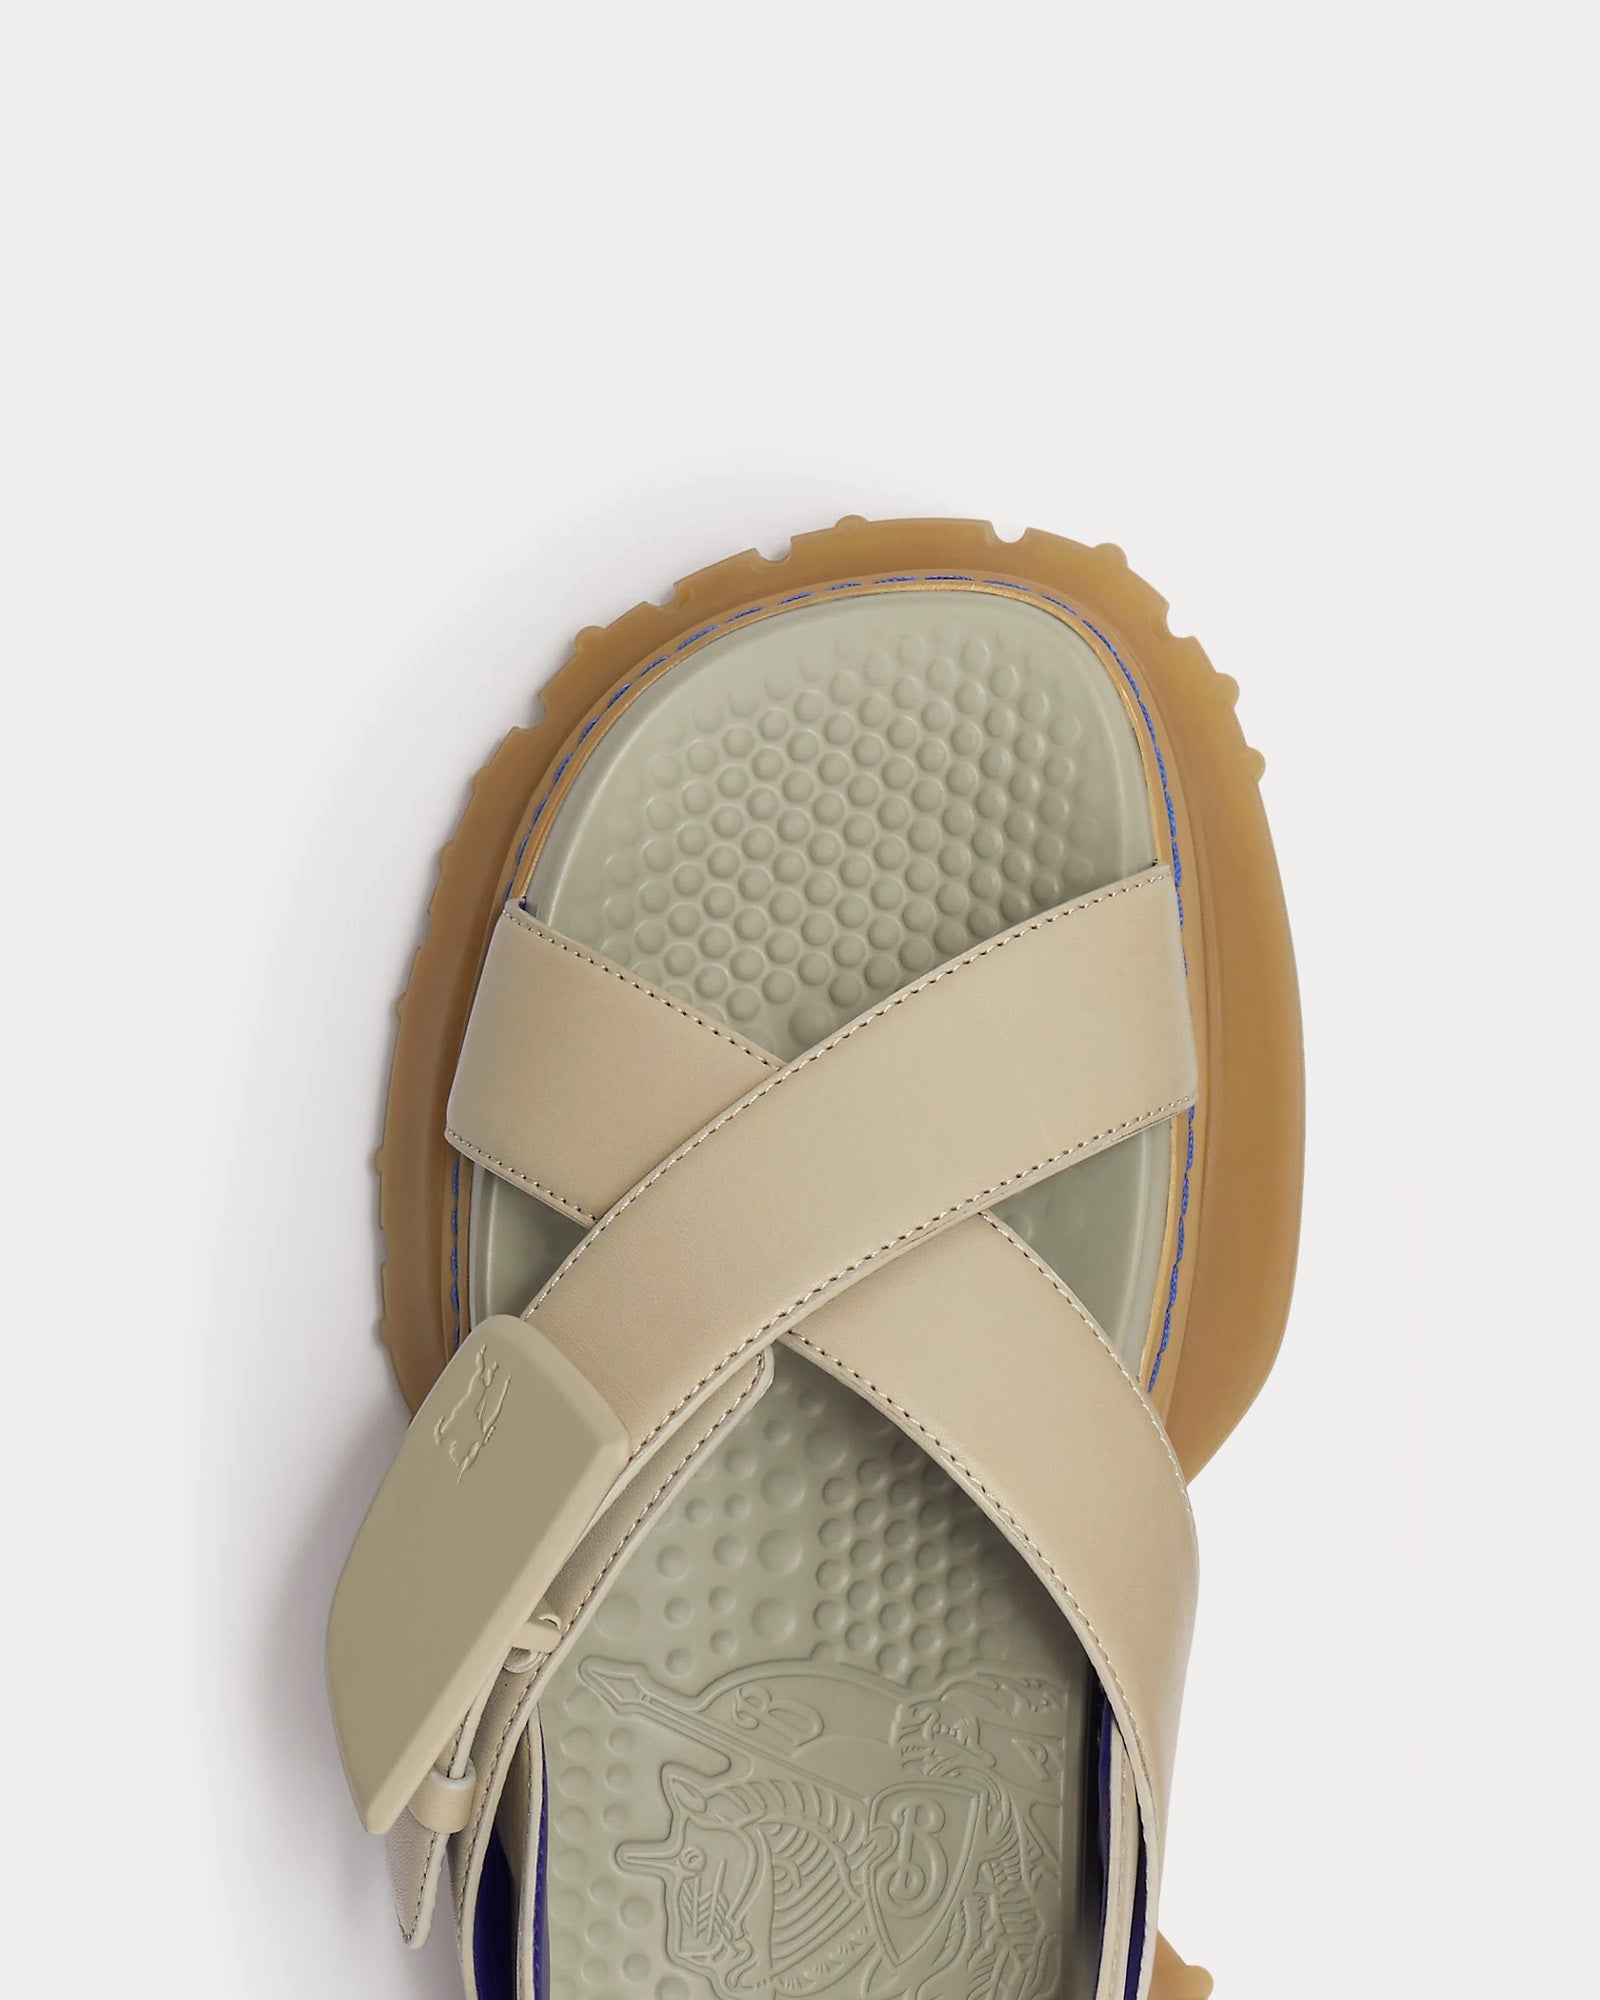 Burberry - Pebble Leather Field Sandals